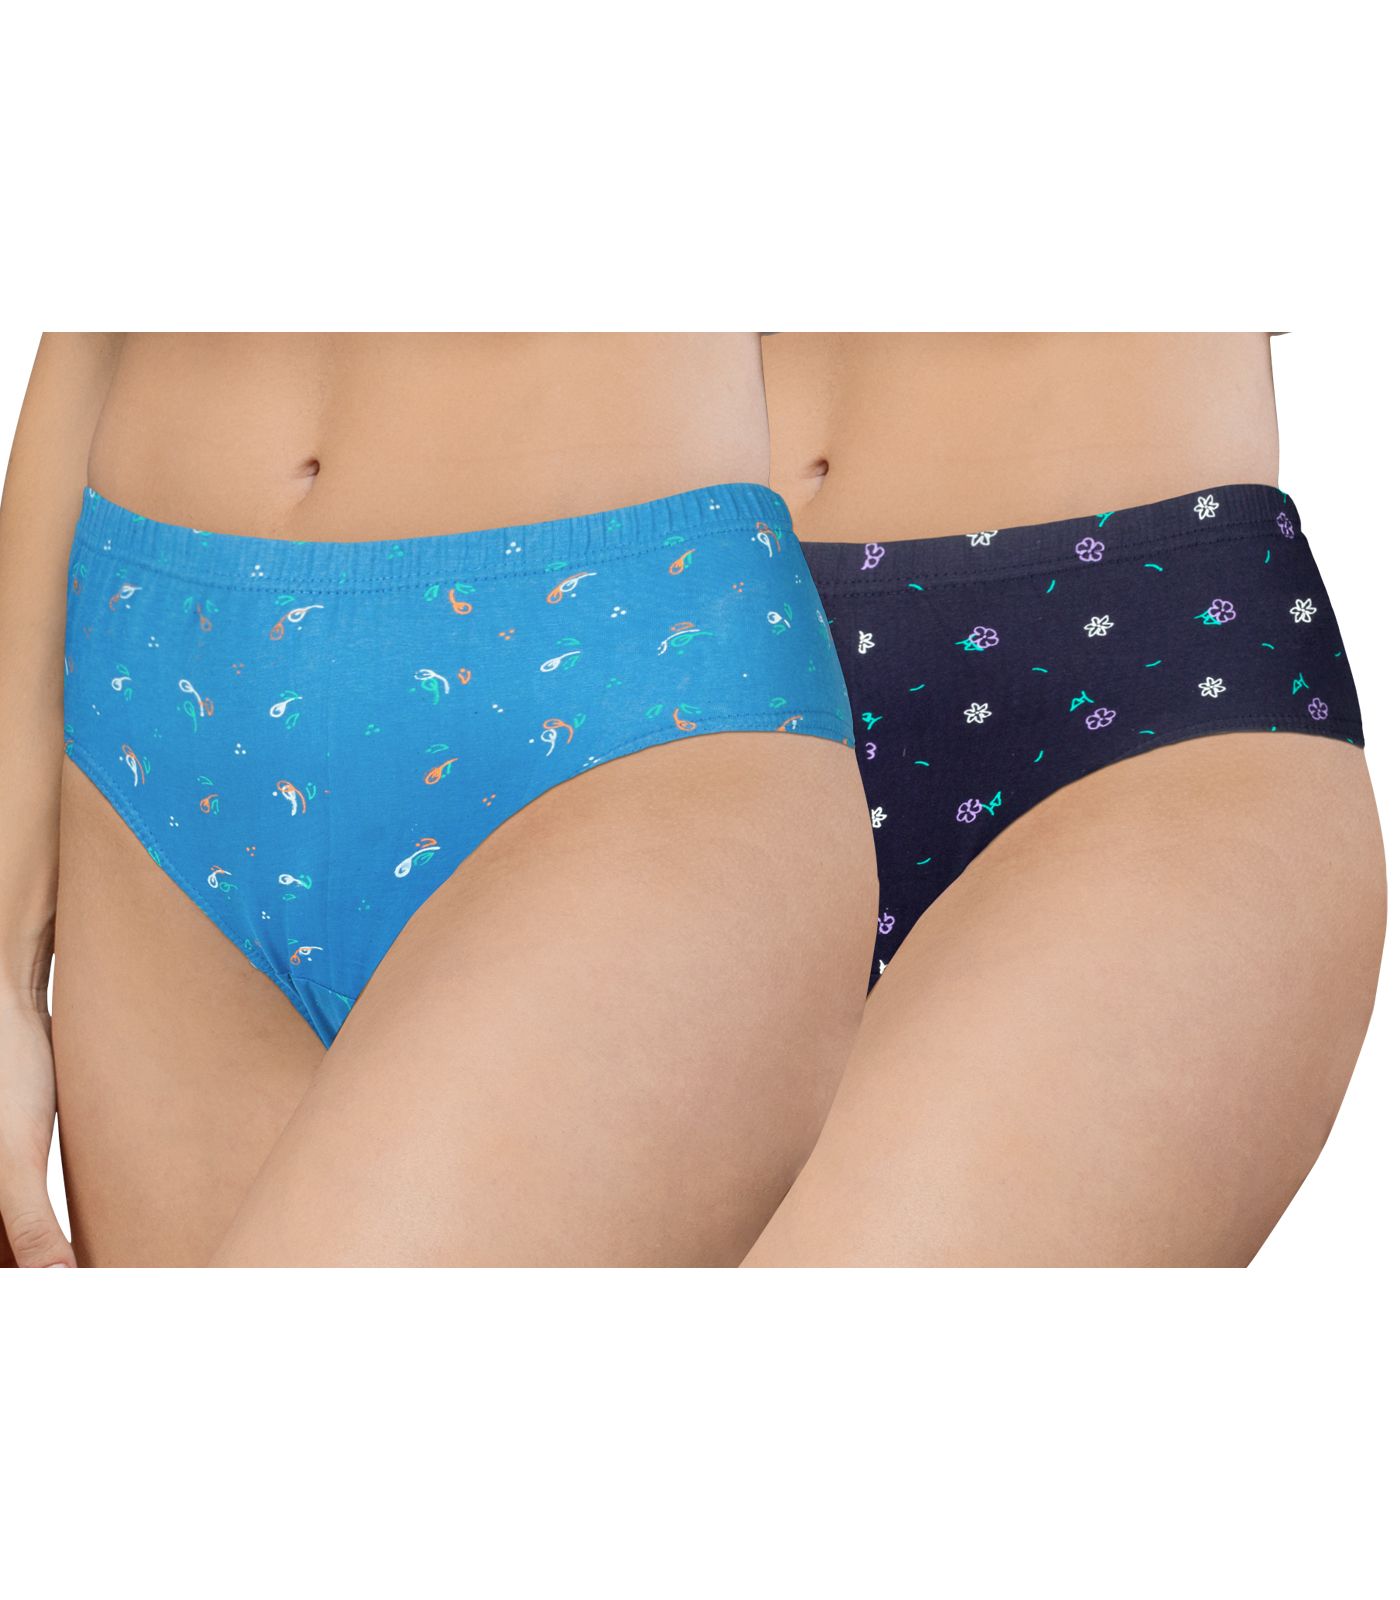 NRG Womens Cotton Assorted Colour Panties ( Pack of 2 Light Blue - Navy Blue  ) L02 Hipster